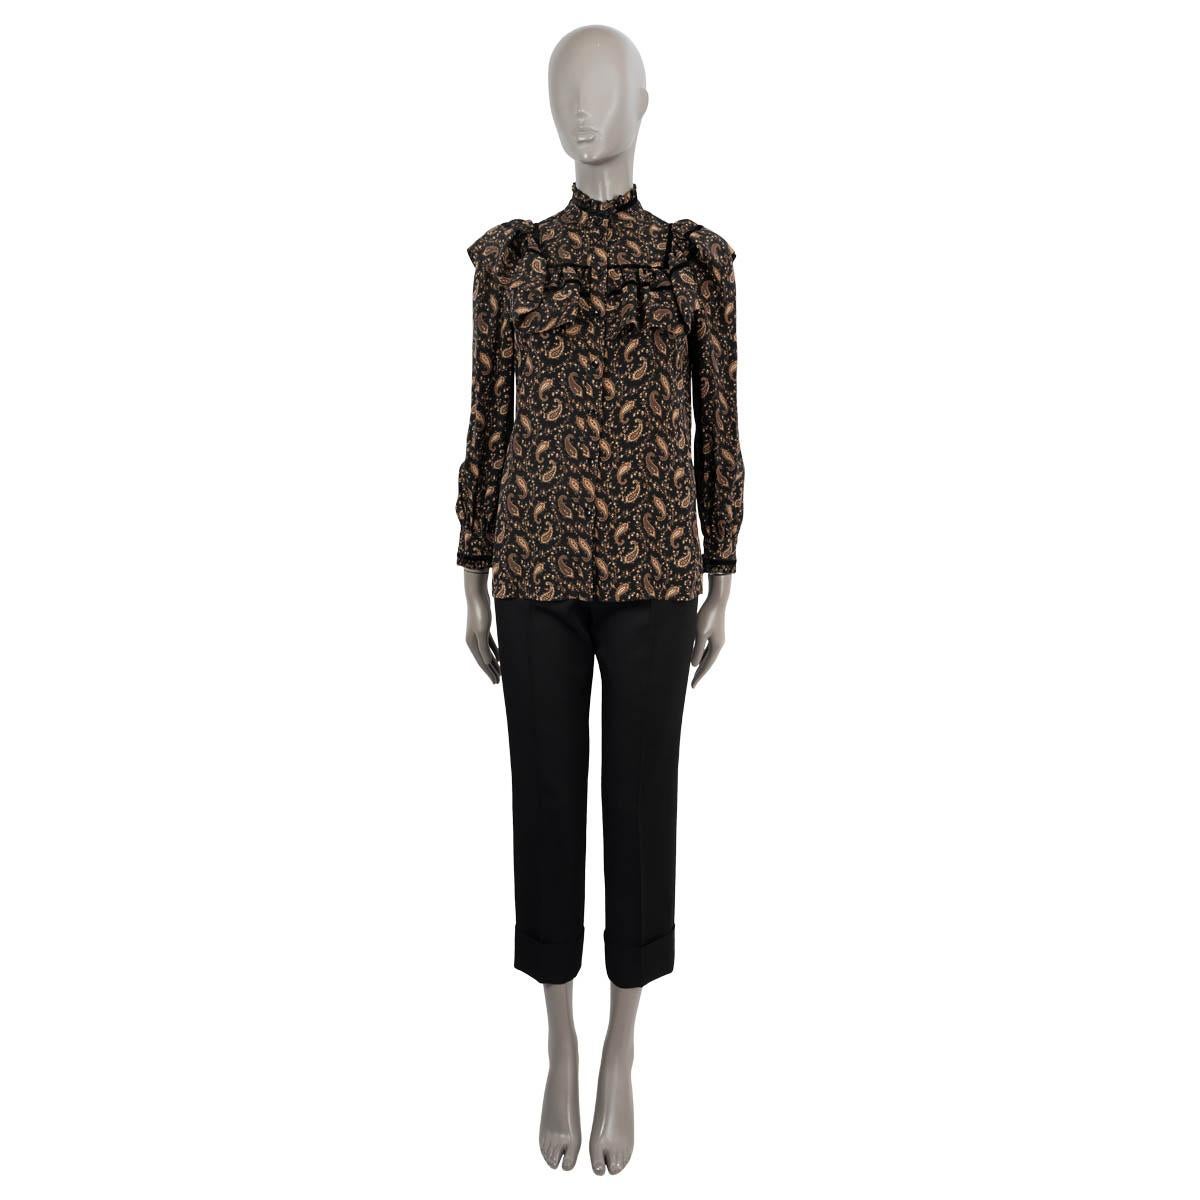 100% authentic Saint Laurent paisley blouse in black, brown and beige crepe silk (100%). Features a mock-neck, ruffles along the top and black velvet trims. Closes with buttons on the front. Has been worn and is in excellent condition.

2016